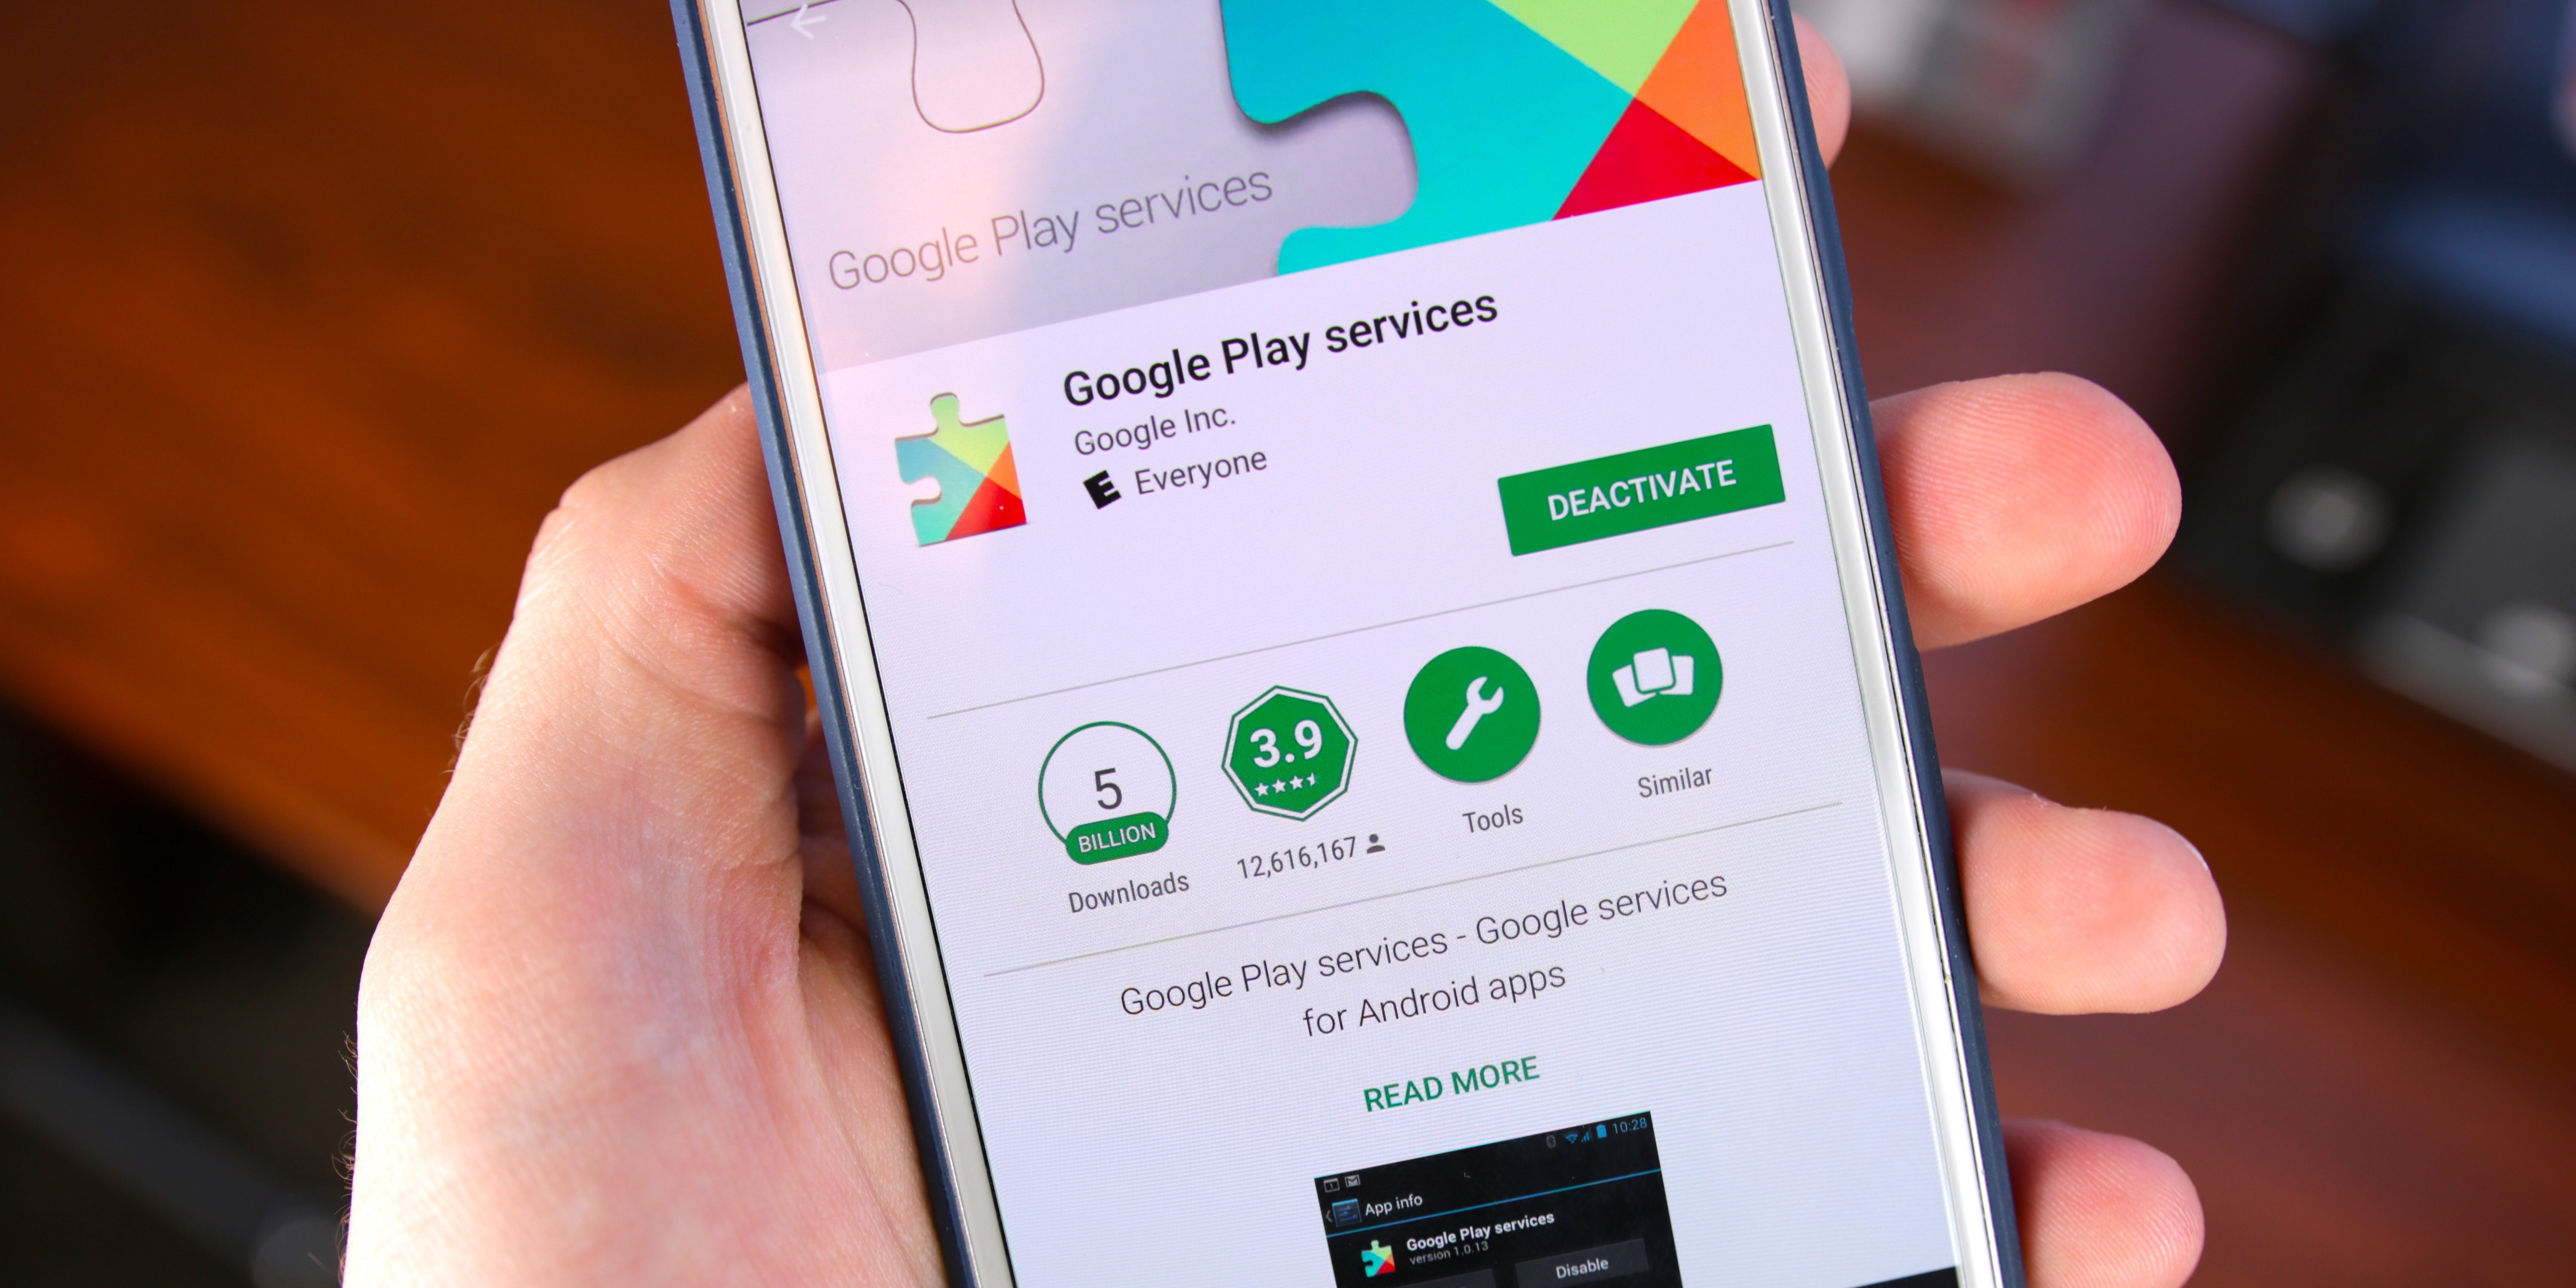 Android Apps by Webtricks Services on Google Play